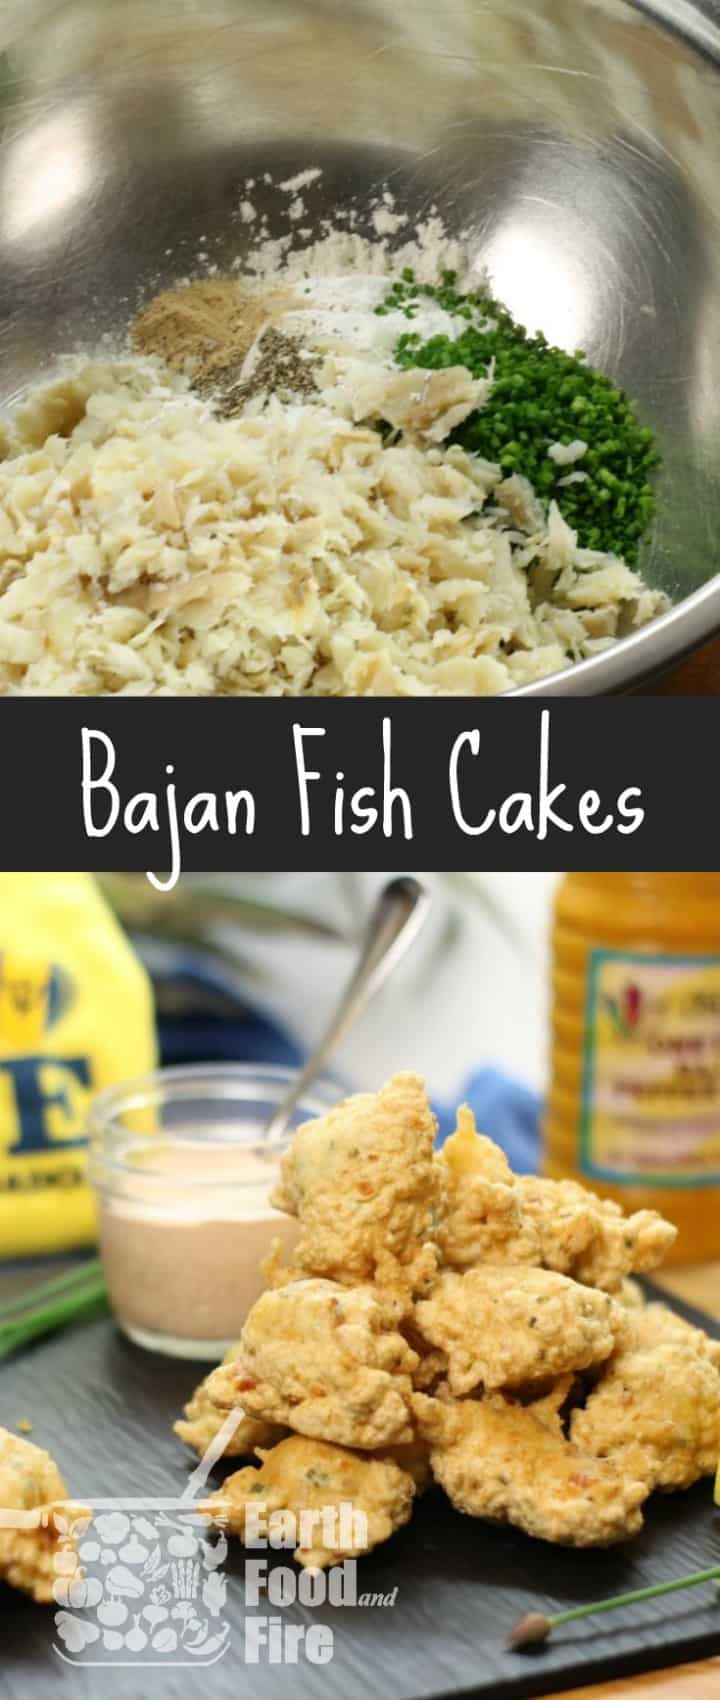 An easy to make 'fritter like' fish cake, these Bajan Fish Cakes featuring salt cod, can be found all over Barbados. Perfect finger food for Summer BBQ's, family gatherings or parties!